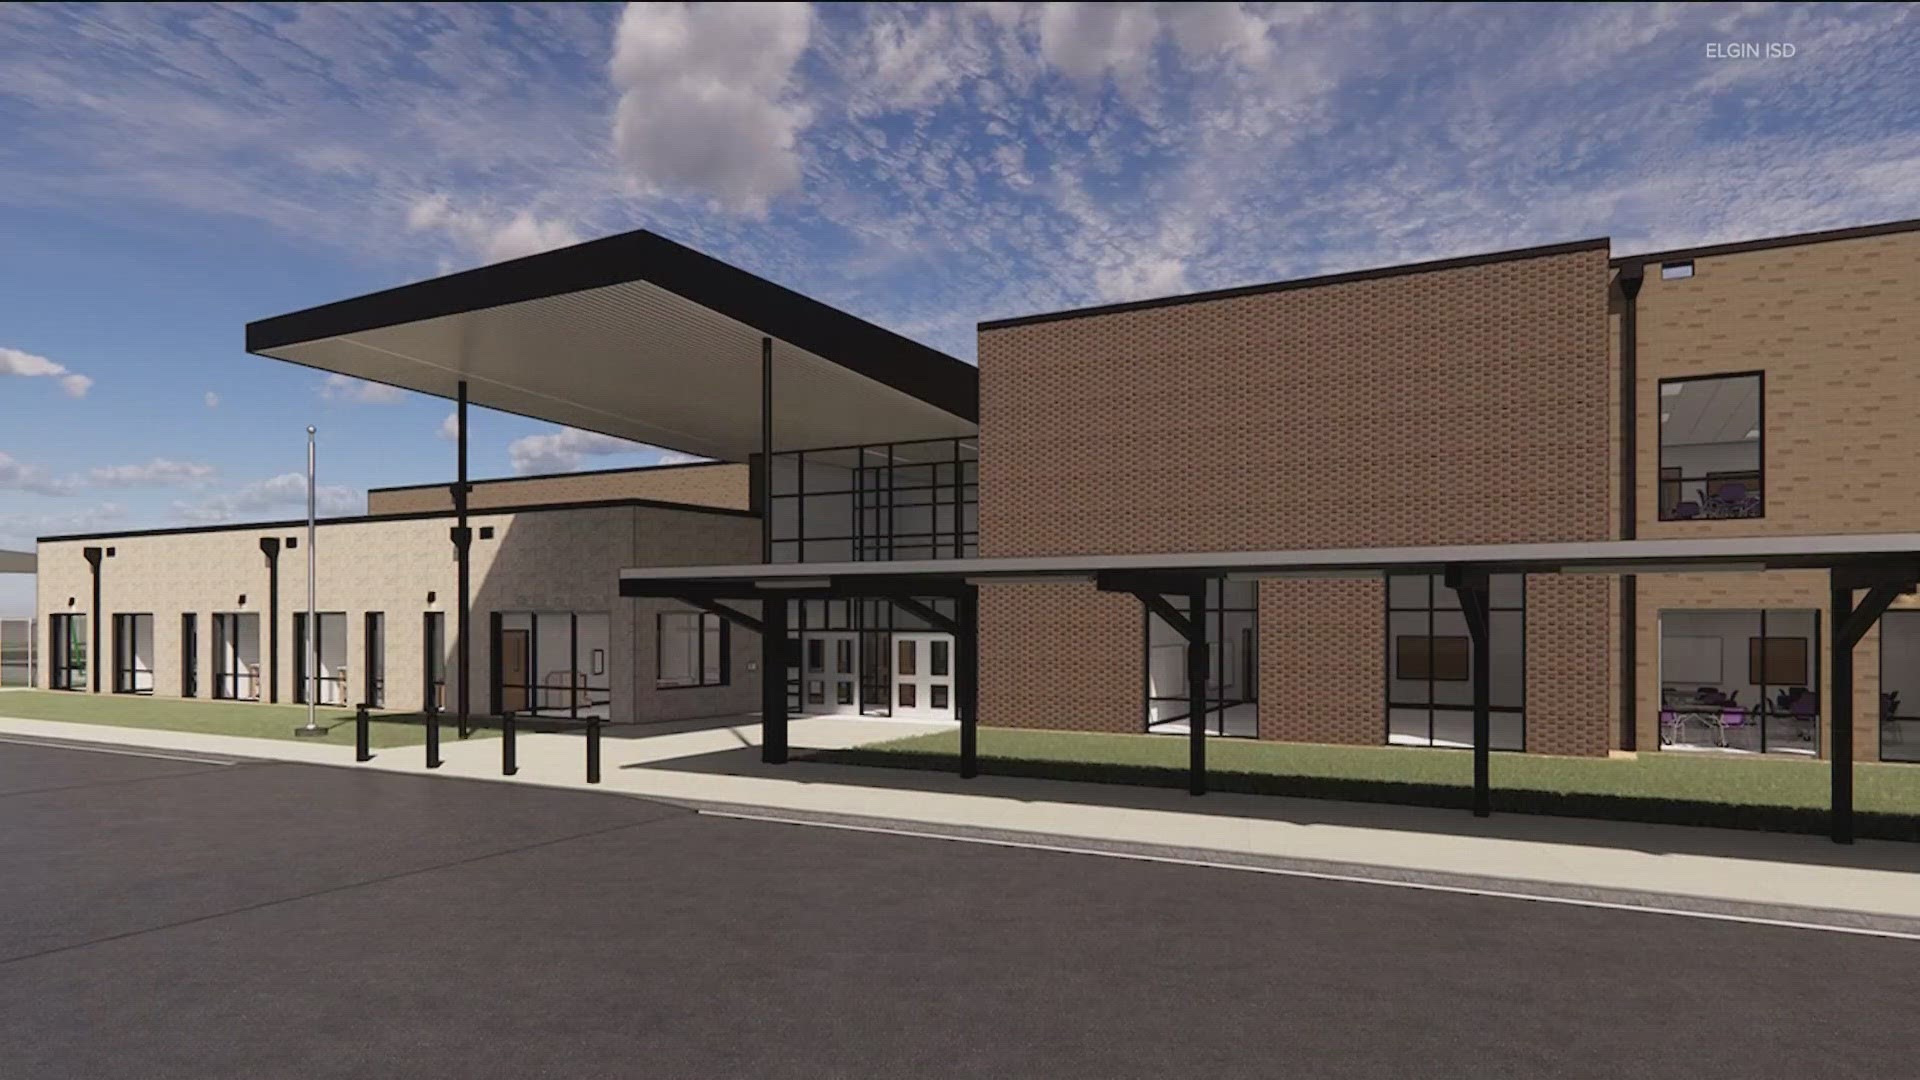 On Tuesday morning, Elgin ISD broke ground on its fifth elementary school. Trinity Ranch Elementary will be located just south of U.S. 290.